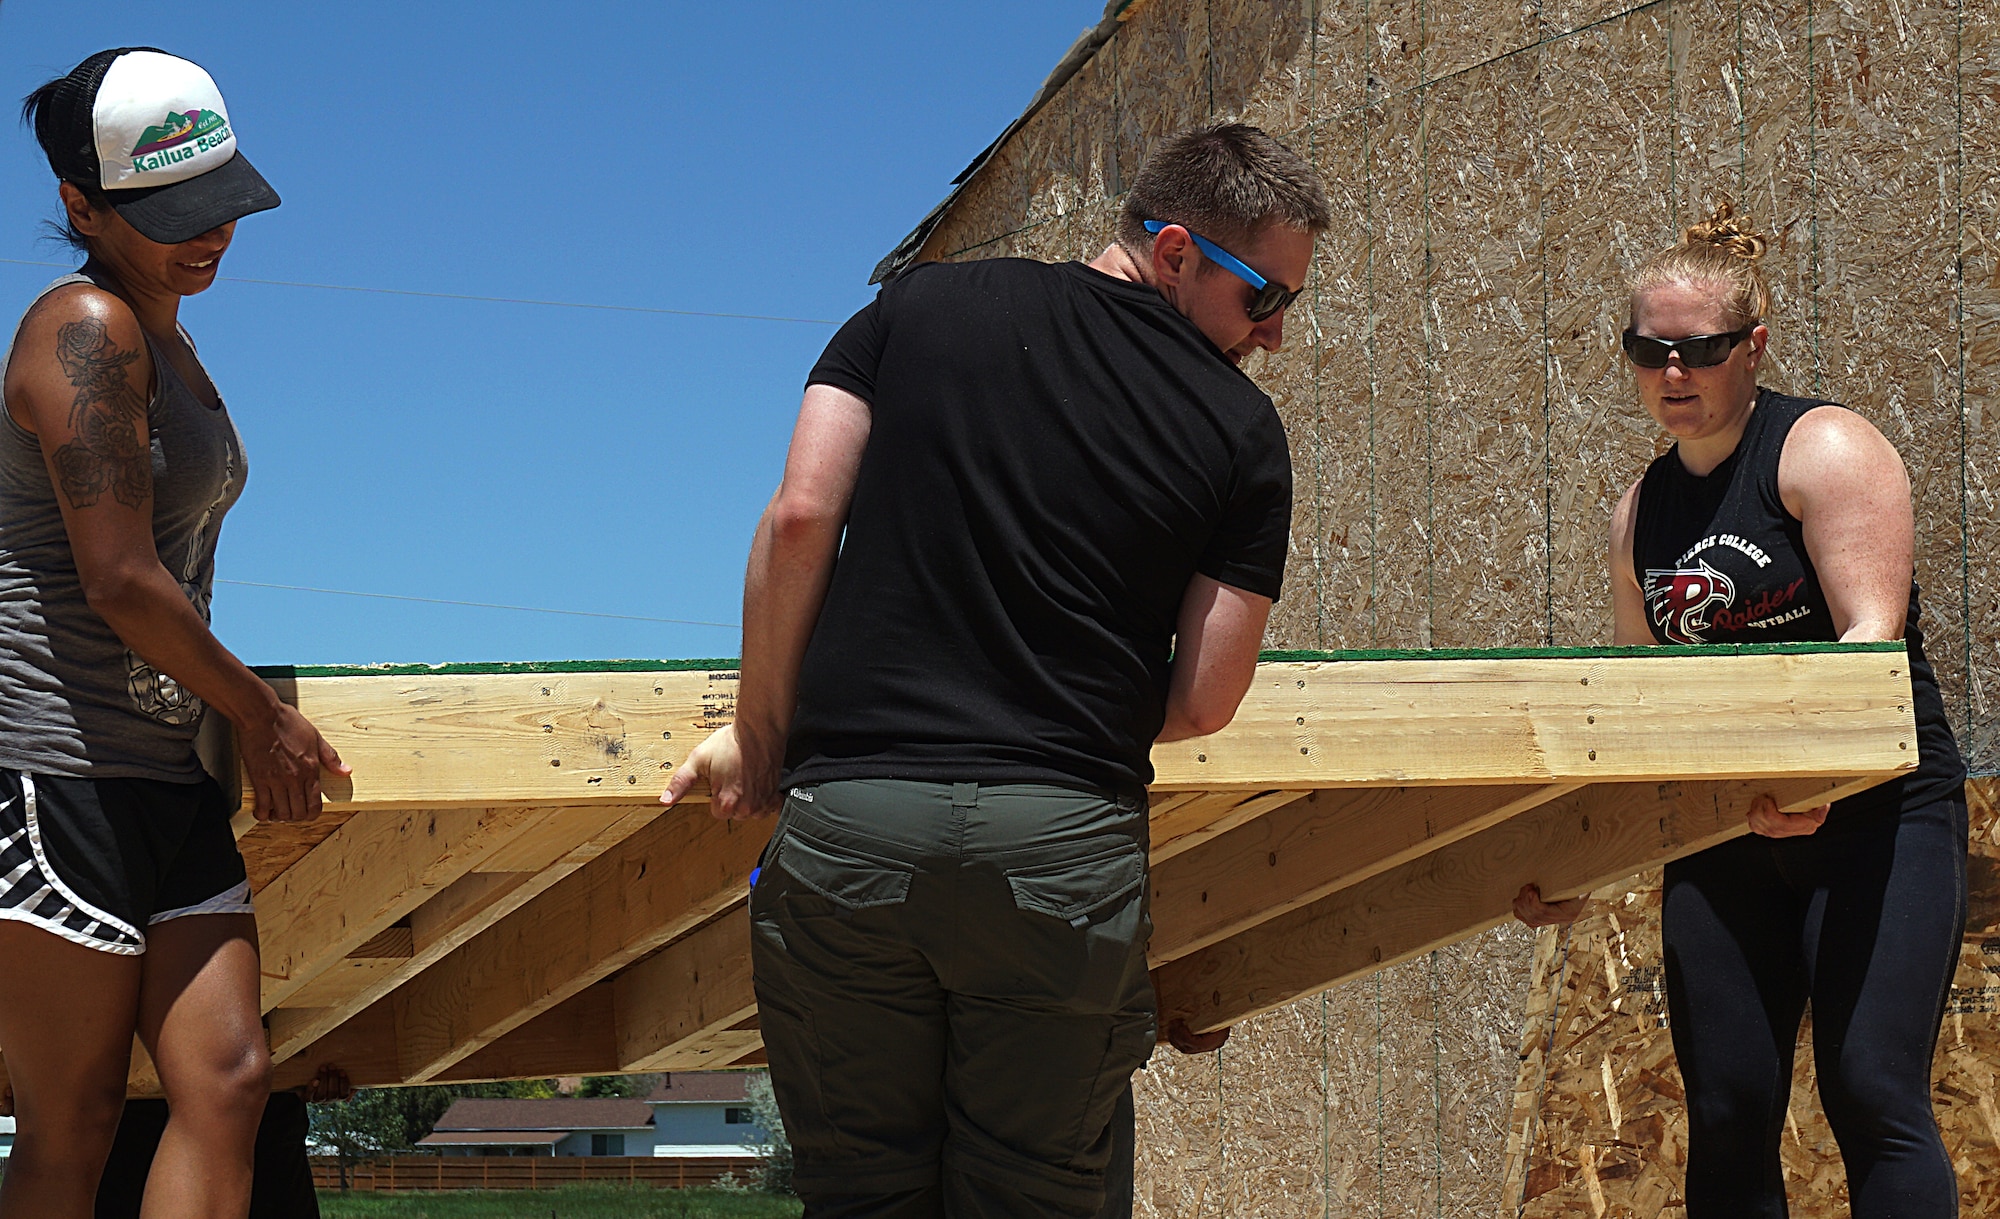 Senior Airmen Gloria Moctezuma, 90th Security Support Squadron; Alexander Gunter, 90th Missile Wing Protocol Office; and Staff Sgt. Aubrie Jones, 90th SSPTS, carry a wall into place during a Habitat for Humanity build June 14, 2015. The walls were constructed at Central High School in Cheyenne, Wyo., and transported to the build site. Mighty Ninety Airmen volunteered their time to help construct the house in Cheyenne, Wyo. (U.S. Air Force photo by Airman 1st Class Brandon Valle)